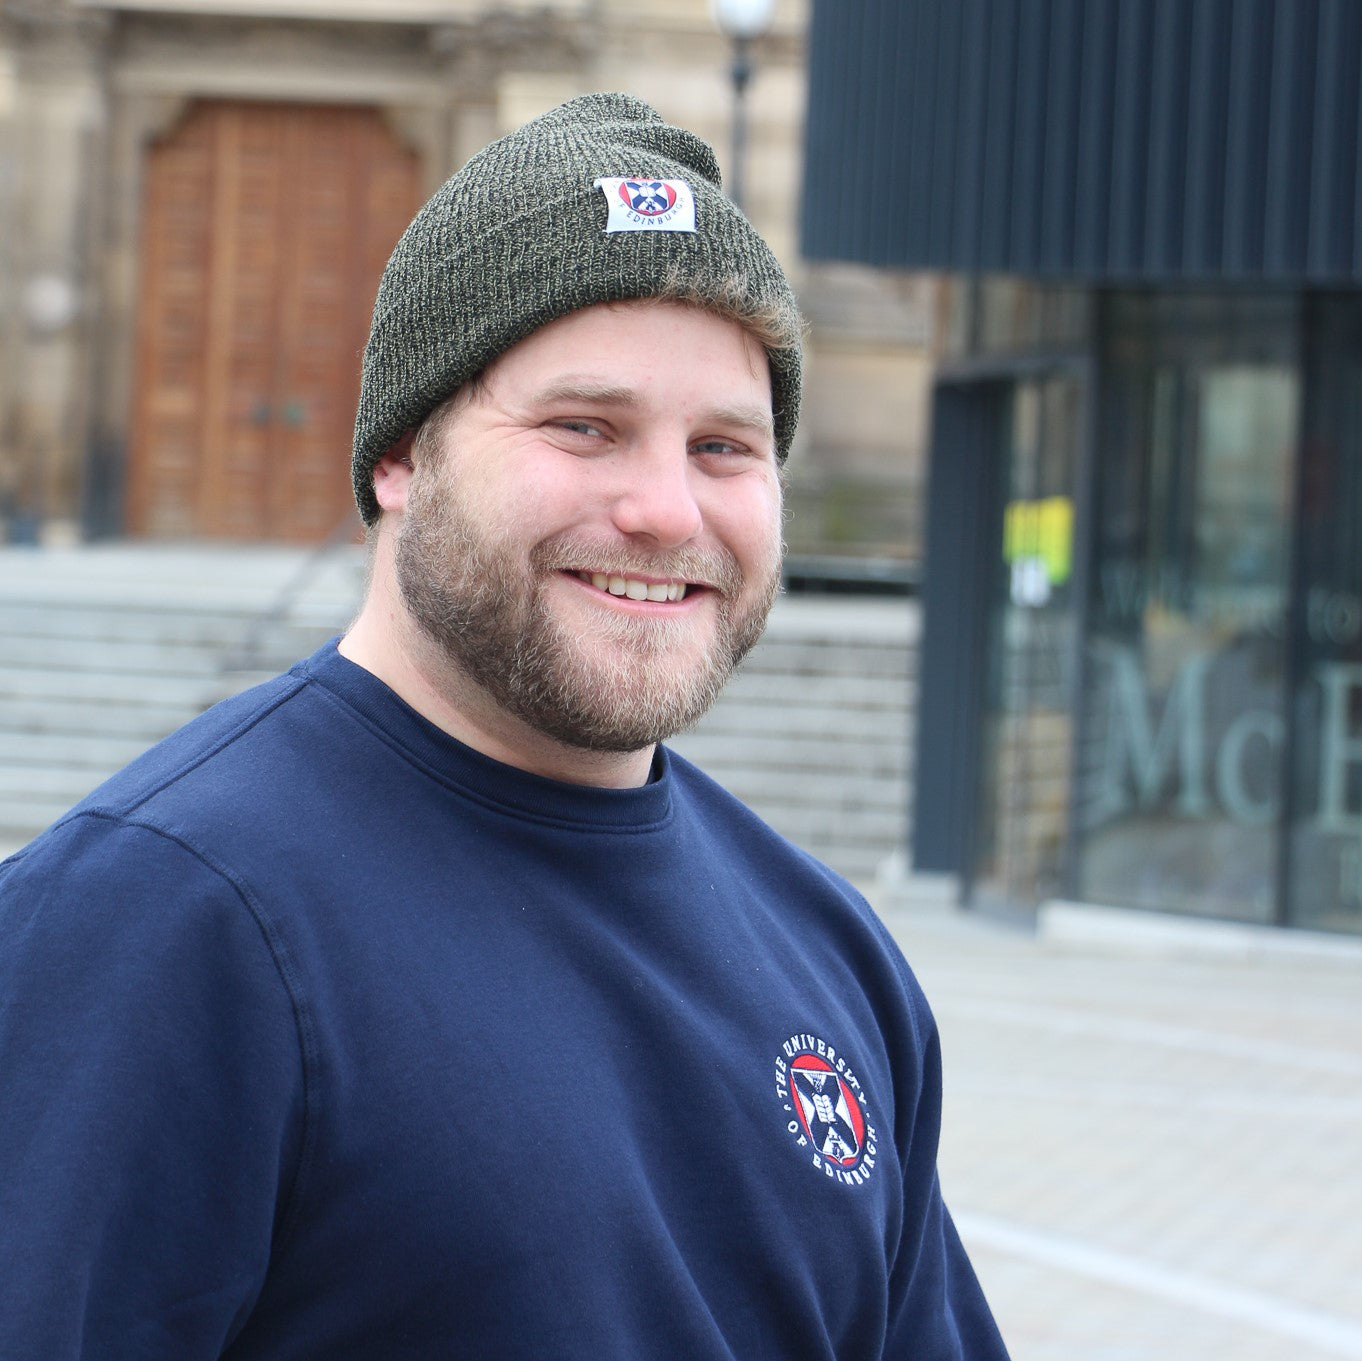 Our model wears the heritage style beanie in green and premium embroidered crest sweatshirt in navy